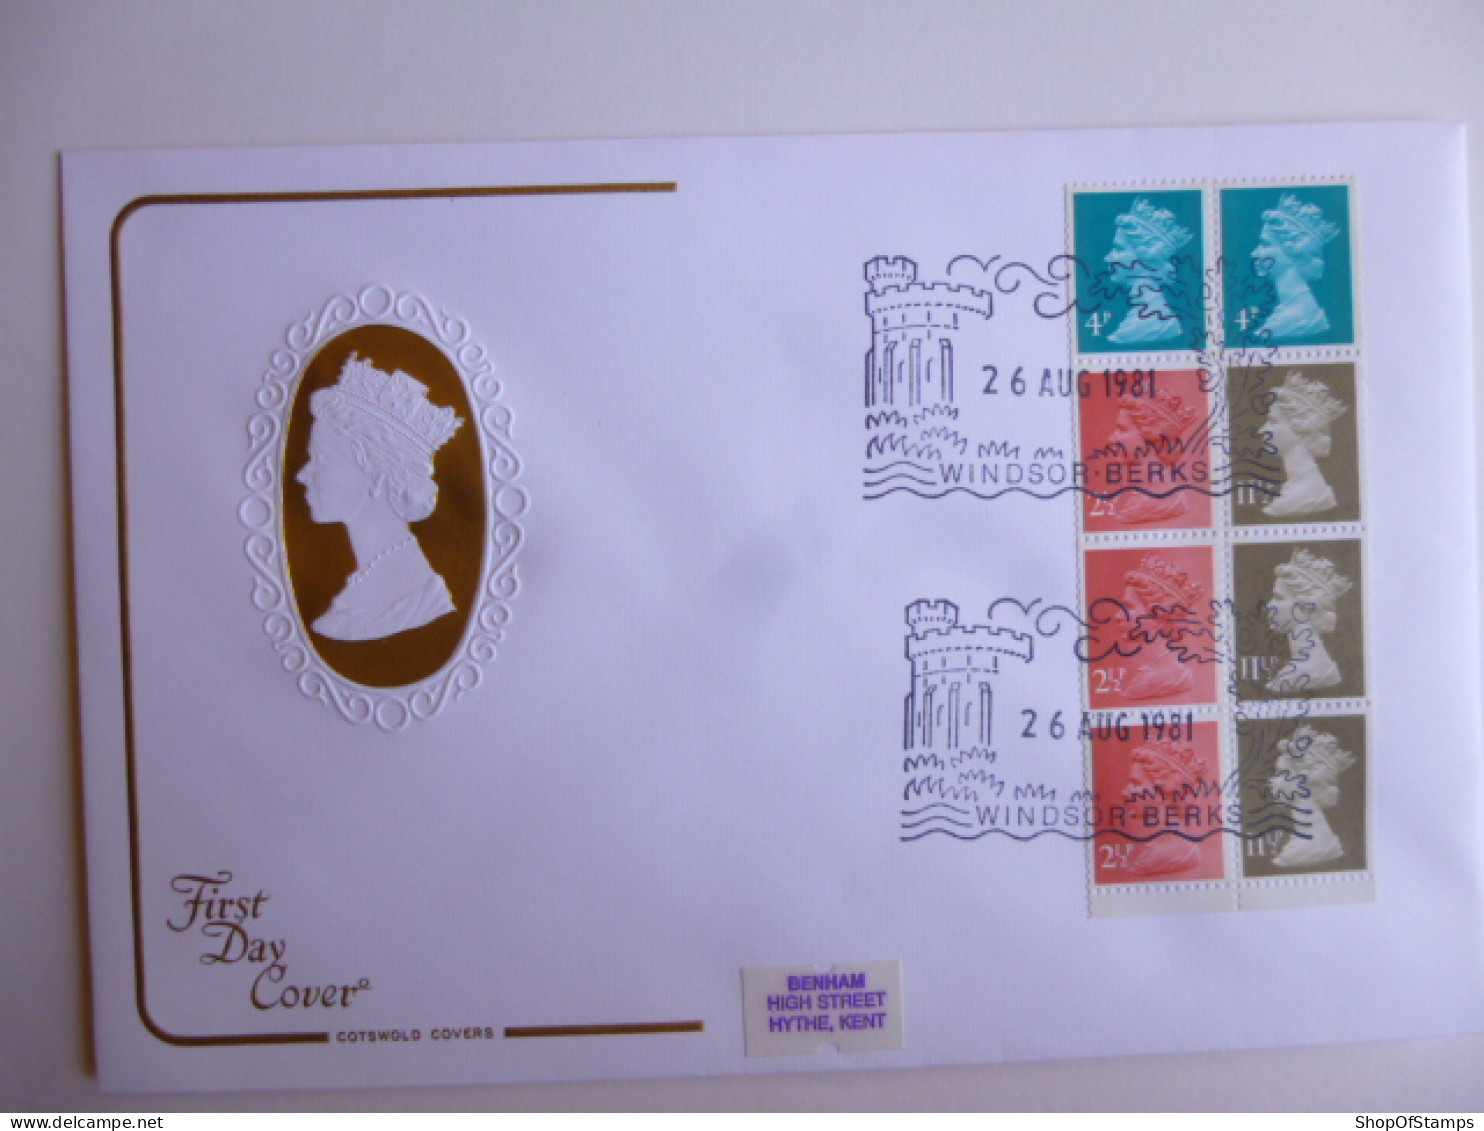 GREAT BRITAIN SG DEFINITIVES ISSUE DATED  26.01.81 FDC  - Non Classés